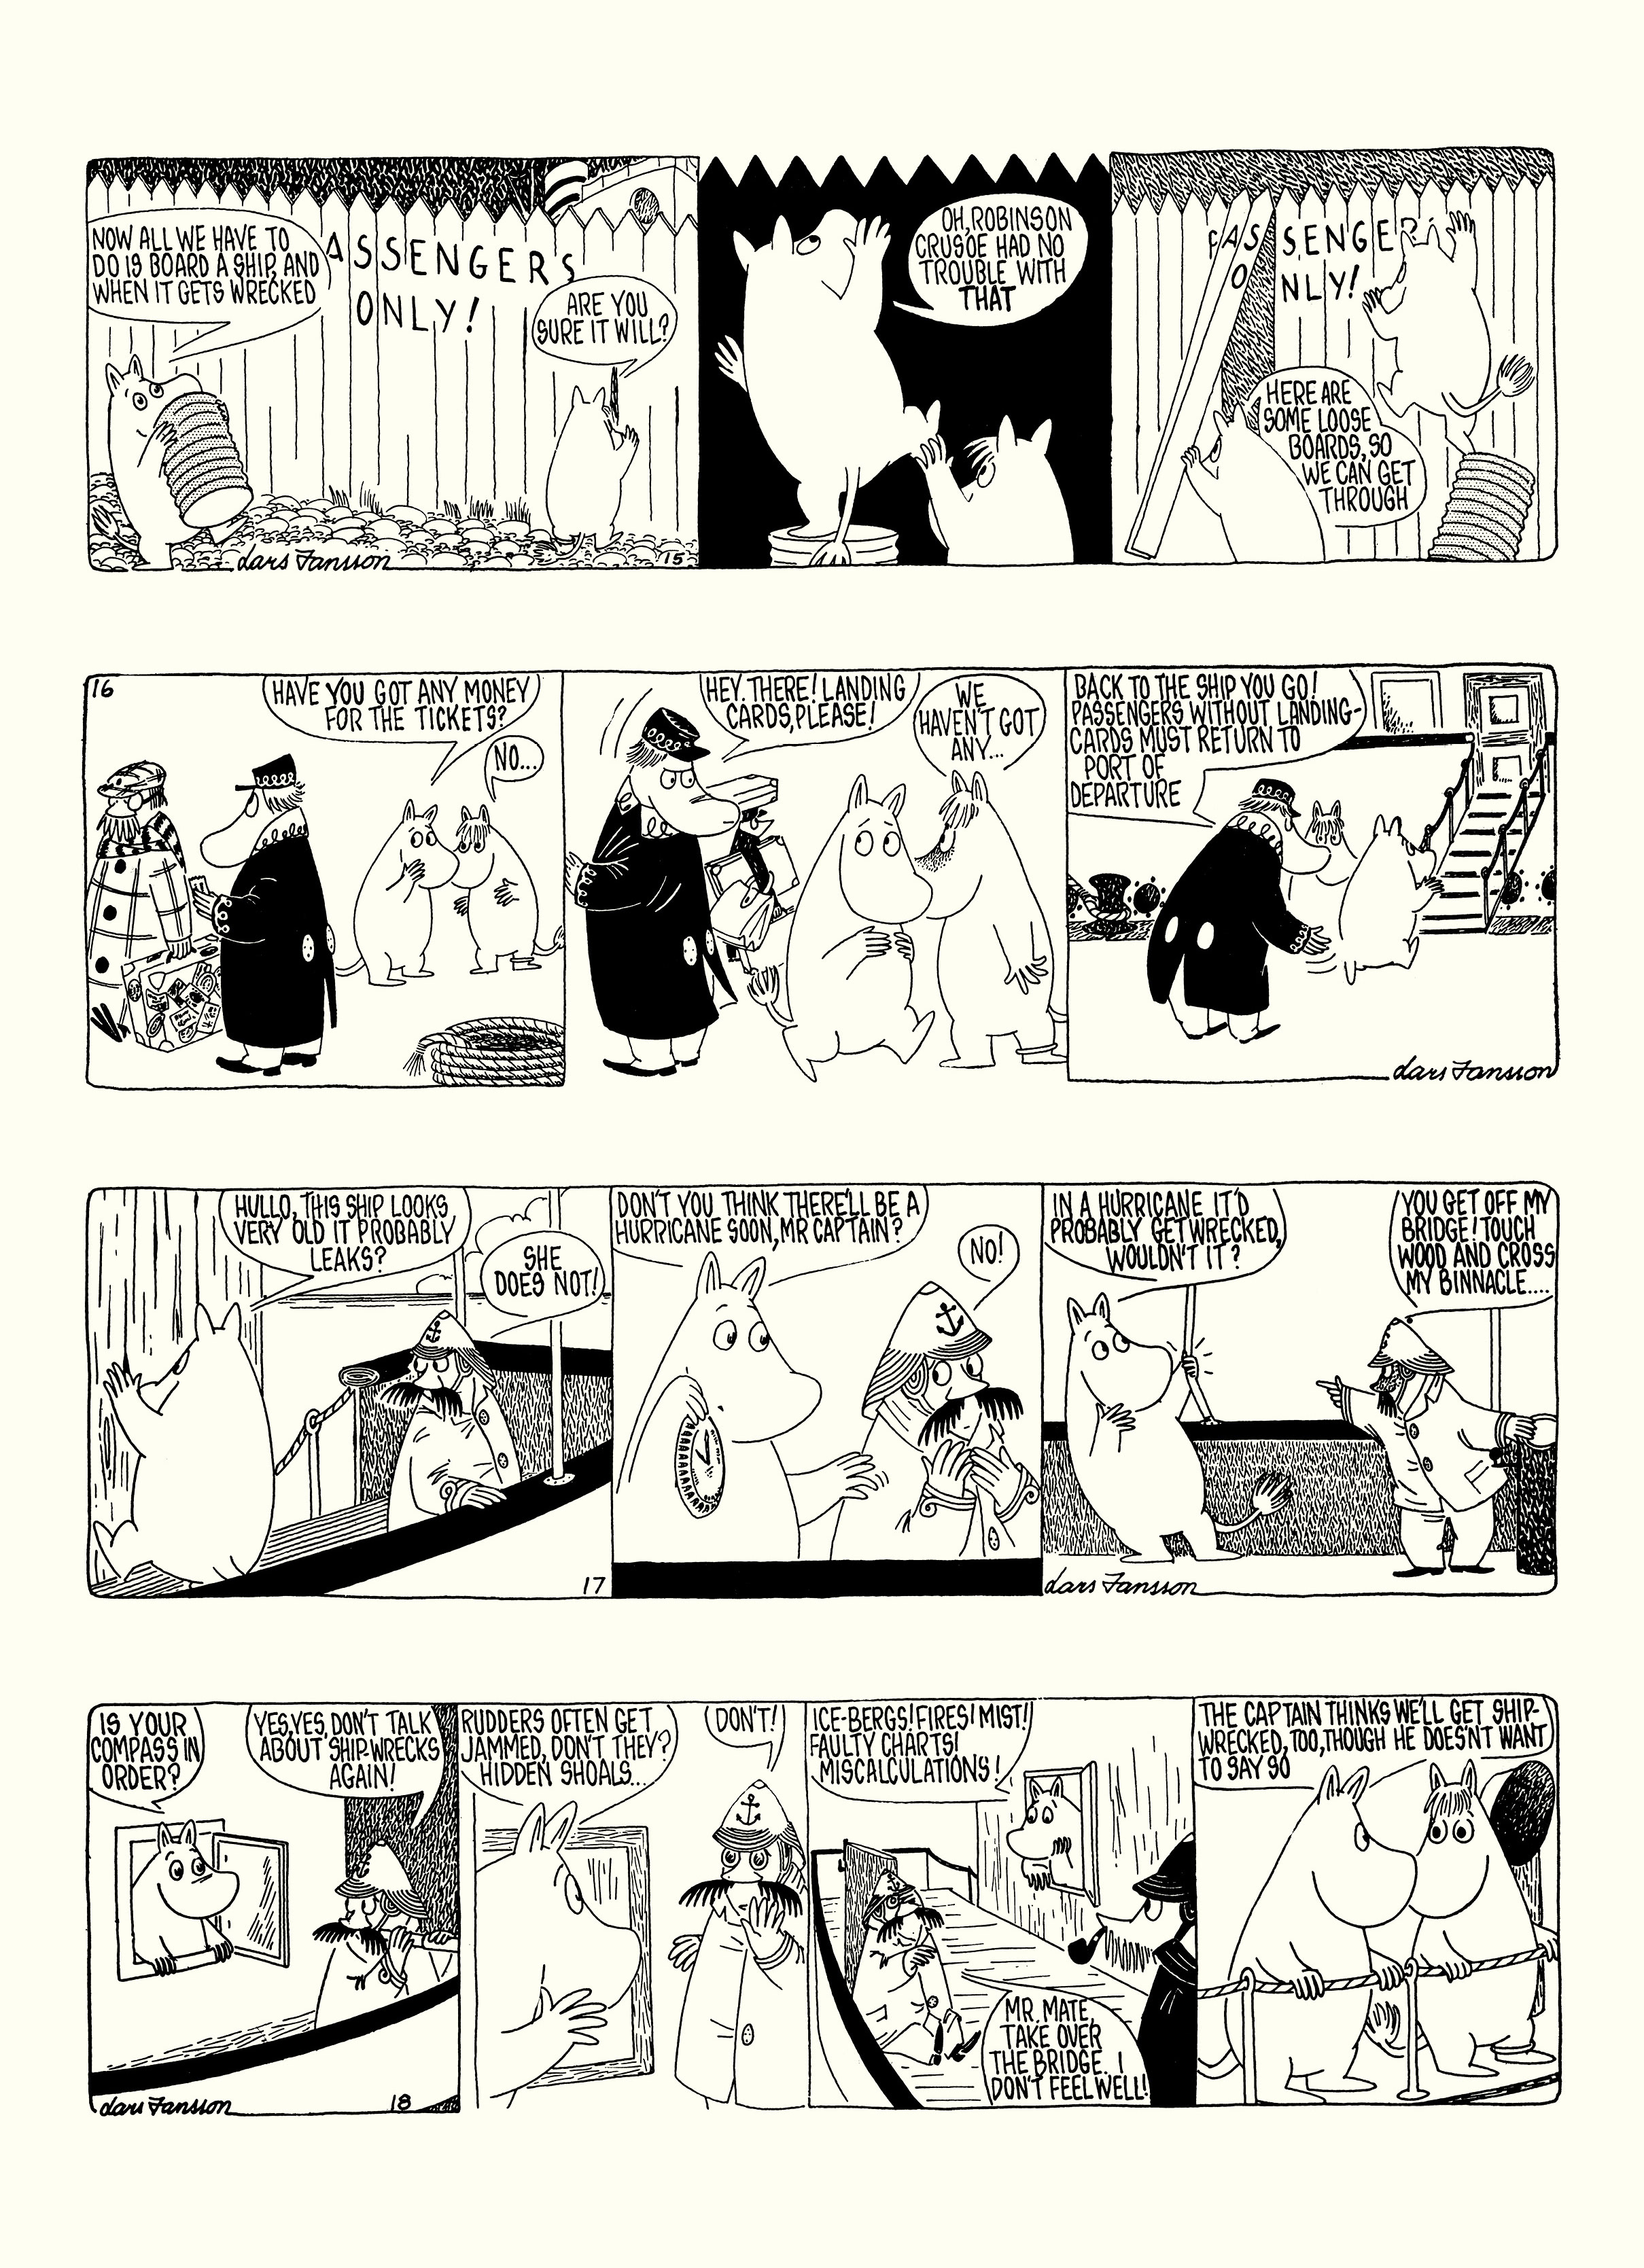 Read online Moomin: The Complete Lars Jansson Comic Strip comic -  Issue # TPB 8 - 9